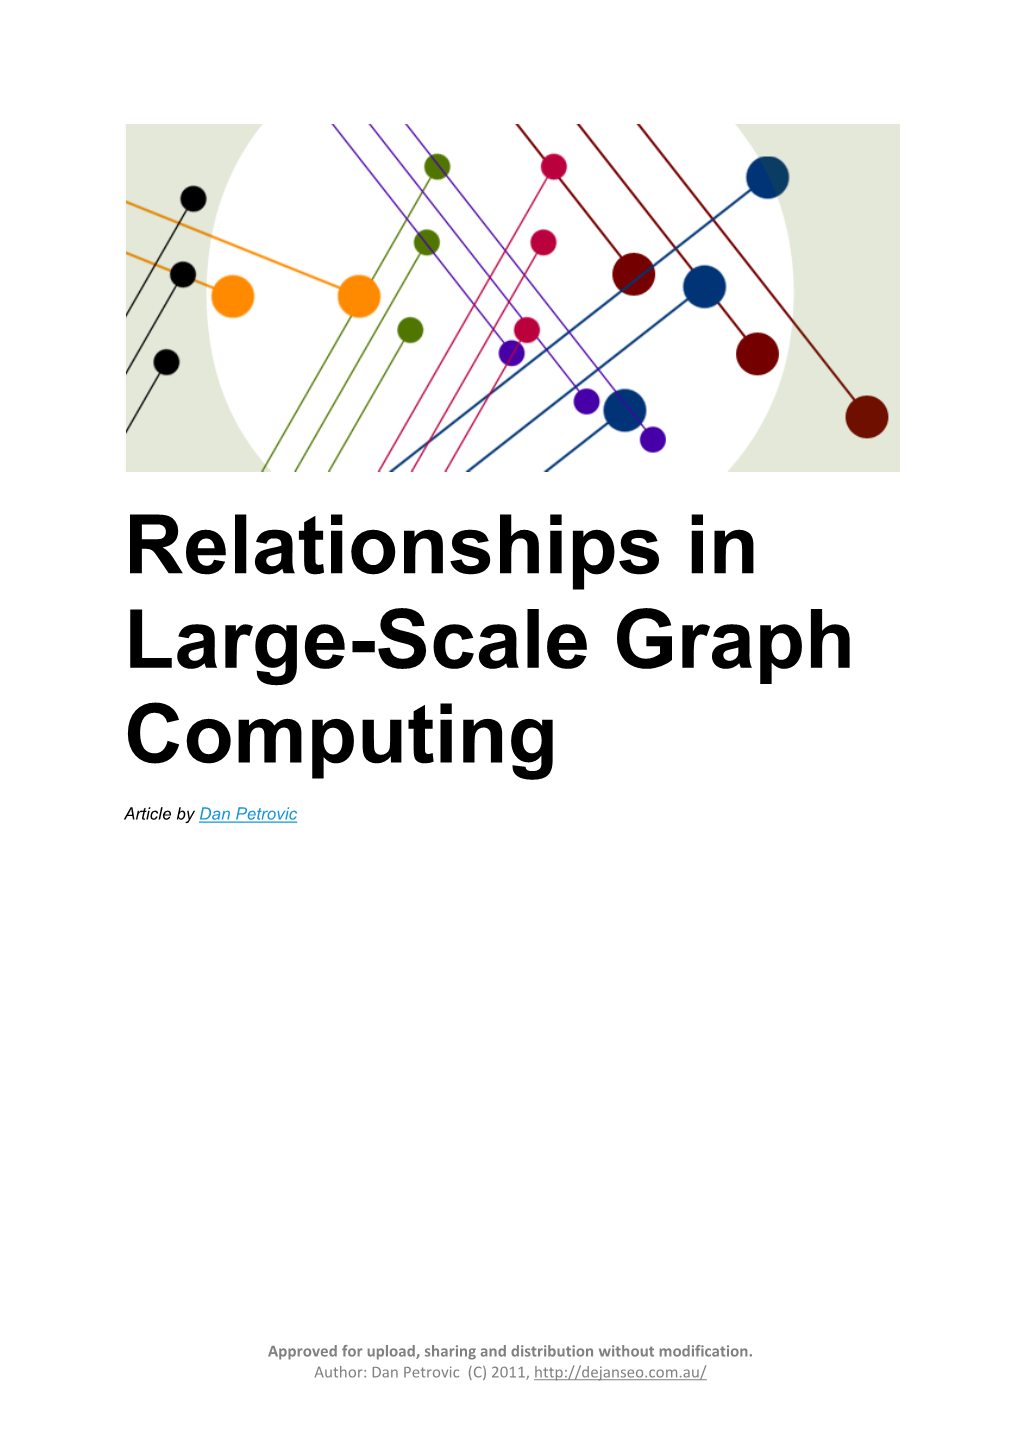 Relationships in Large-Scale Graph Computing